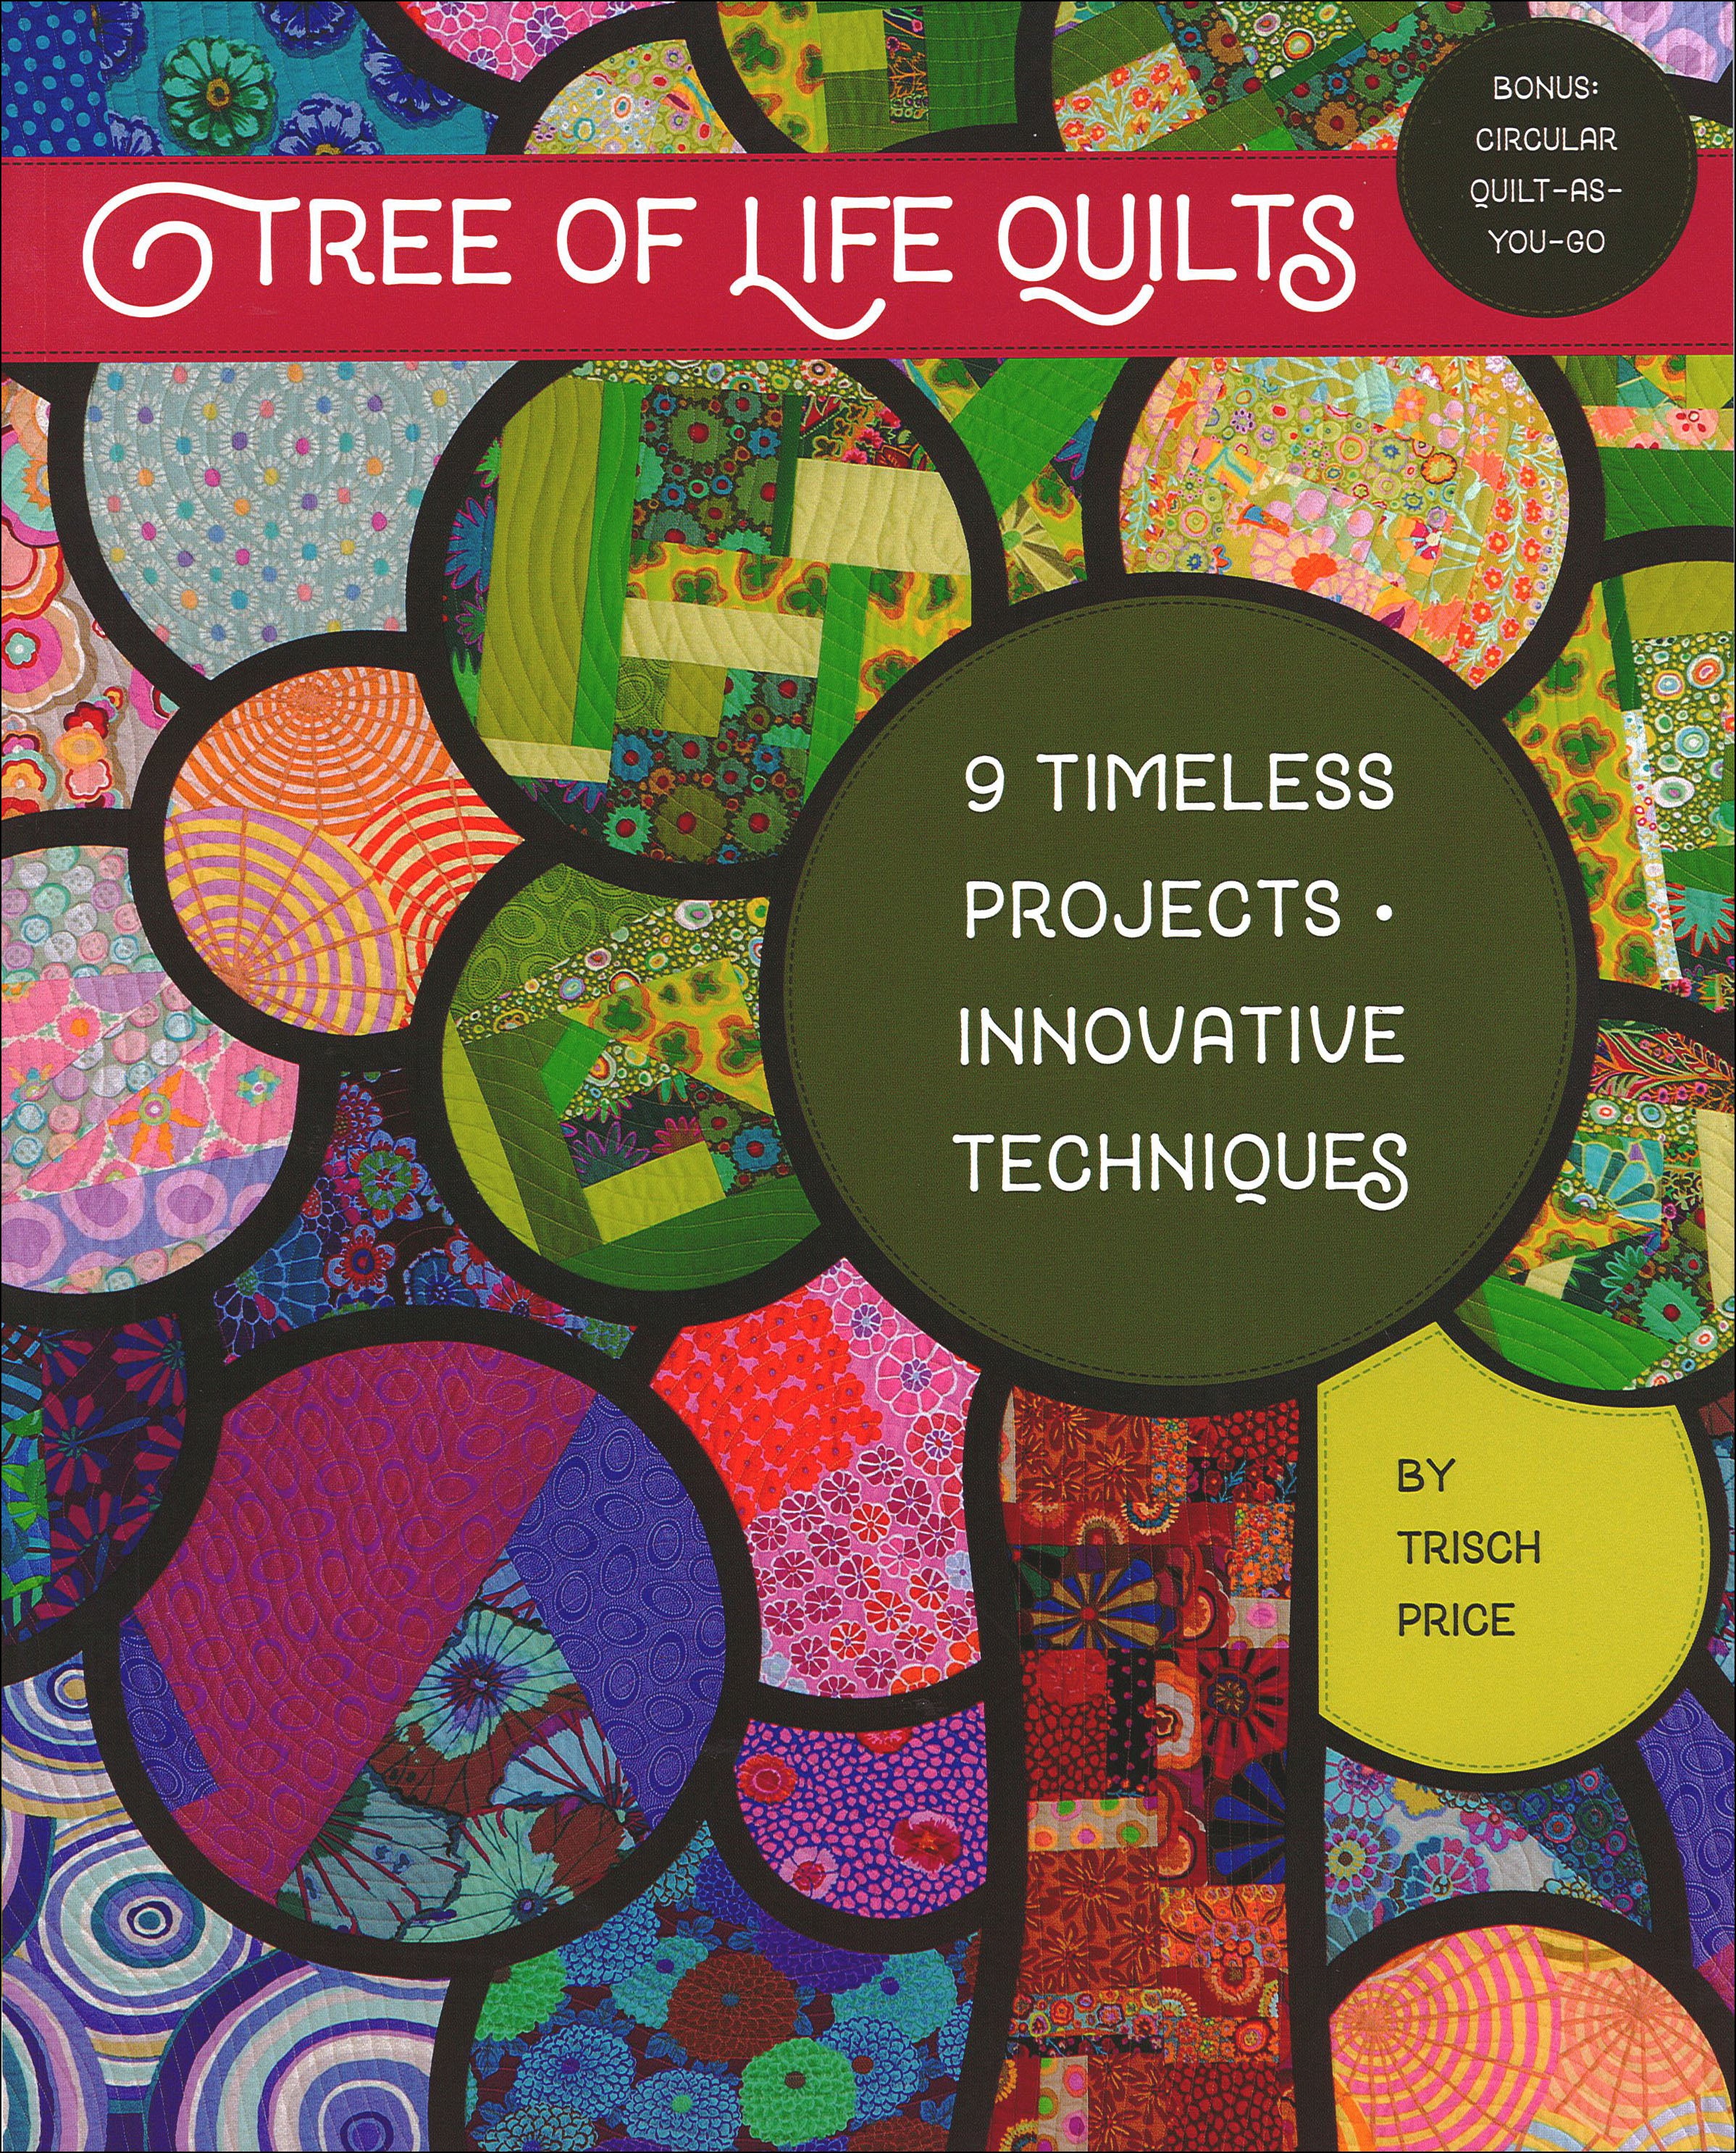 Tree Of Life Quilts Pattern Book by Trisch Price for Stash Books